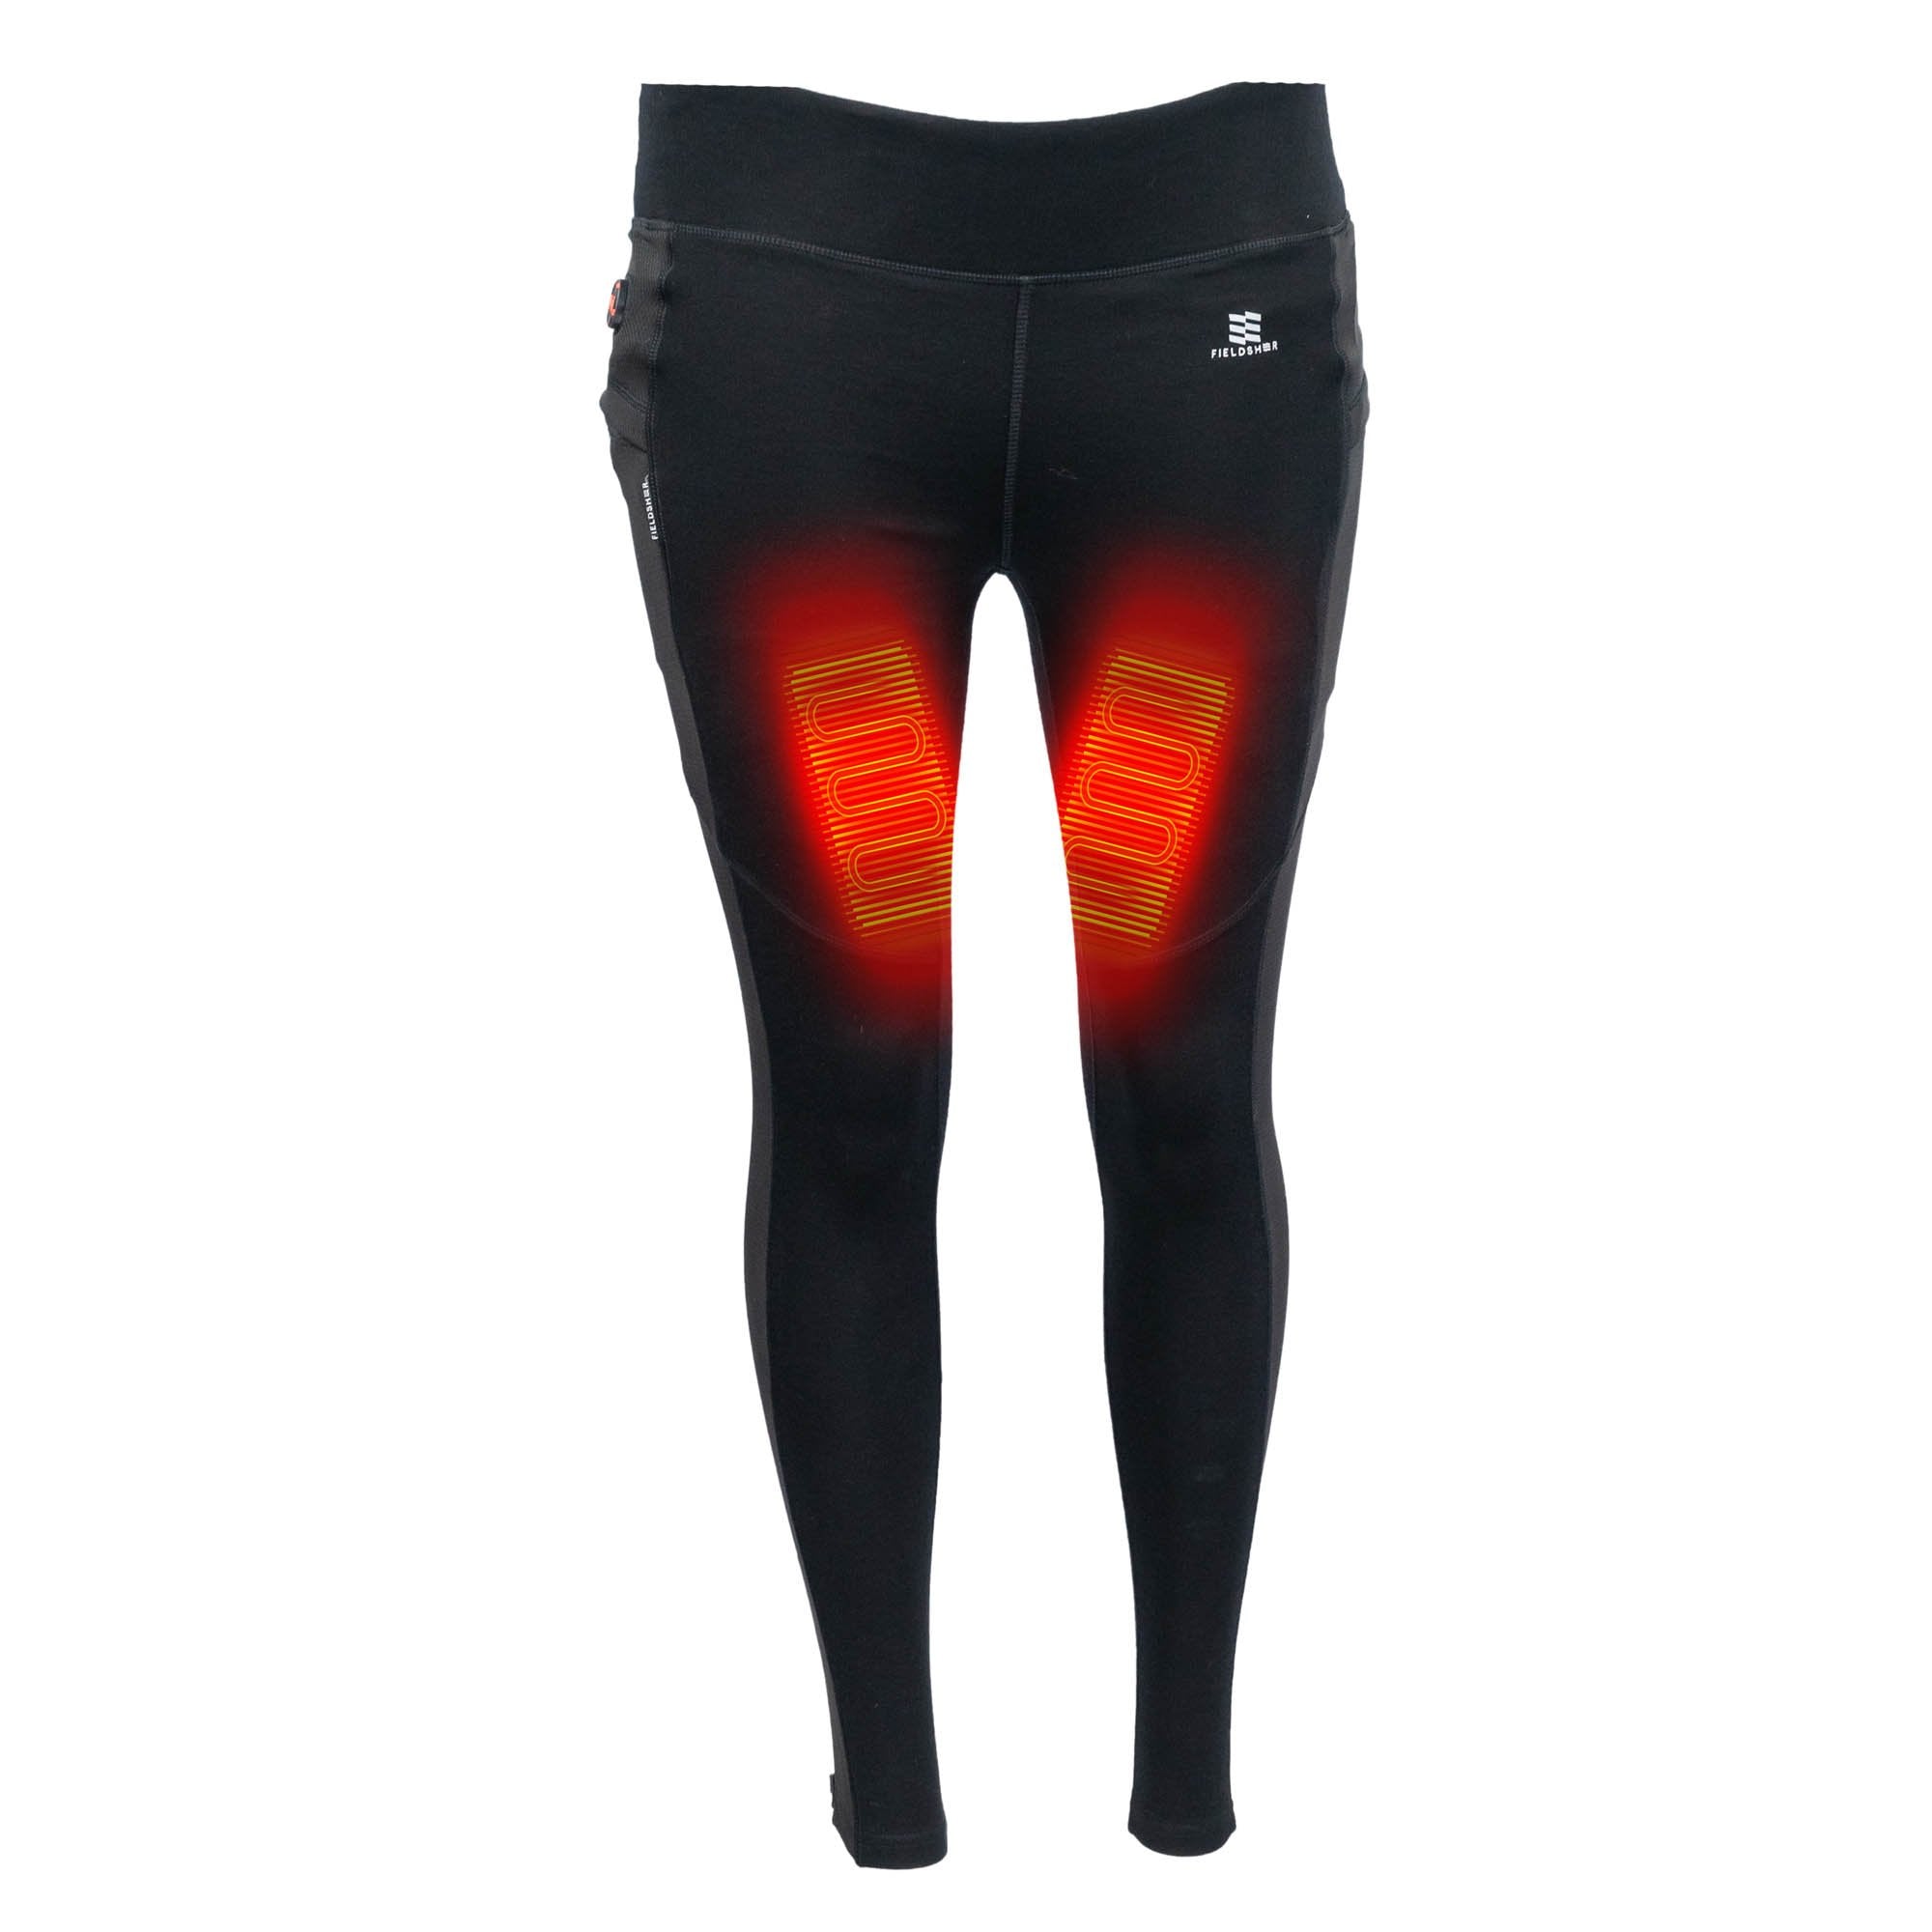 Black Karrimor Womens Thermal Running Tights - Get The Label